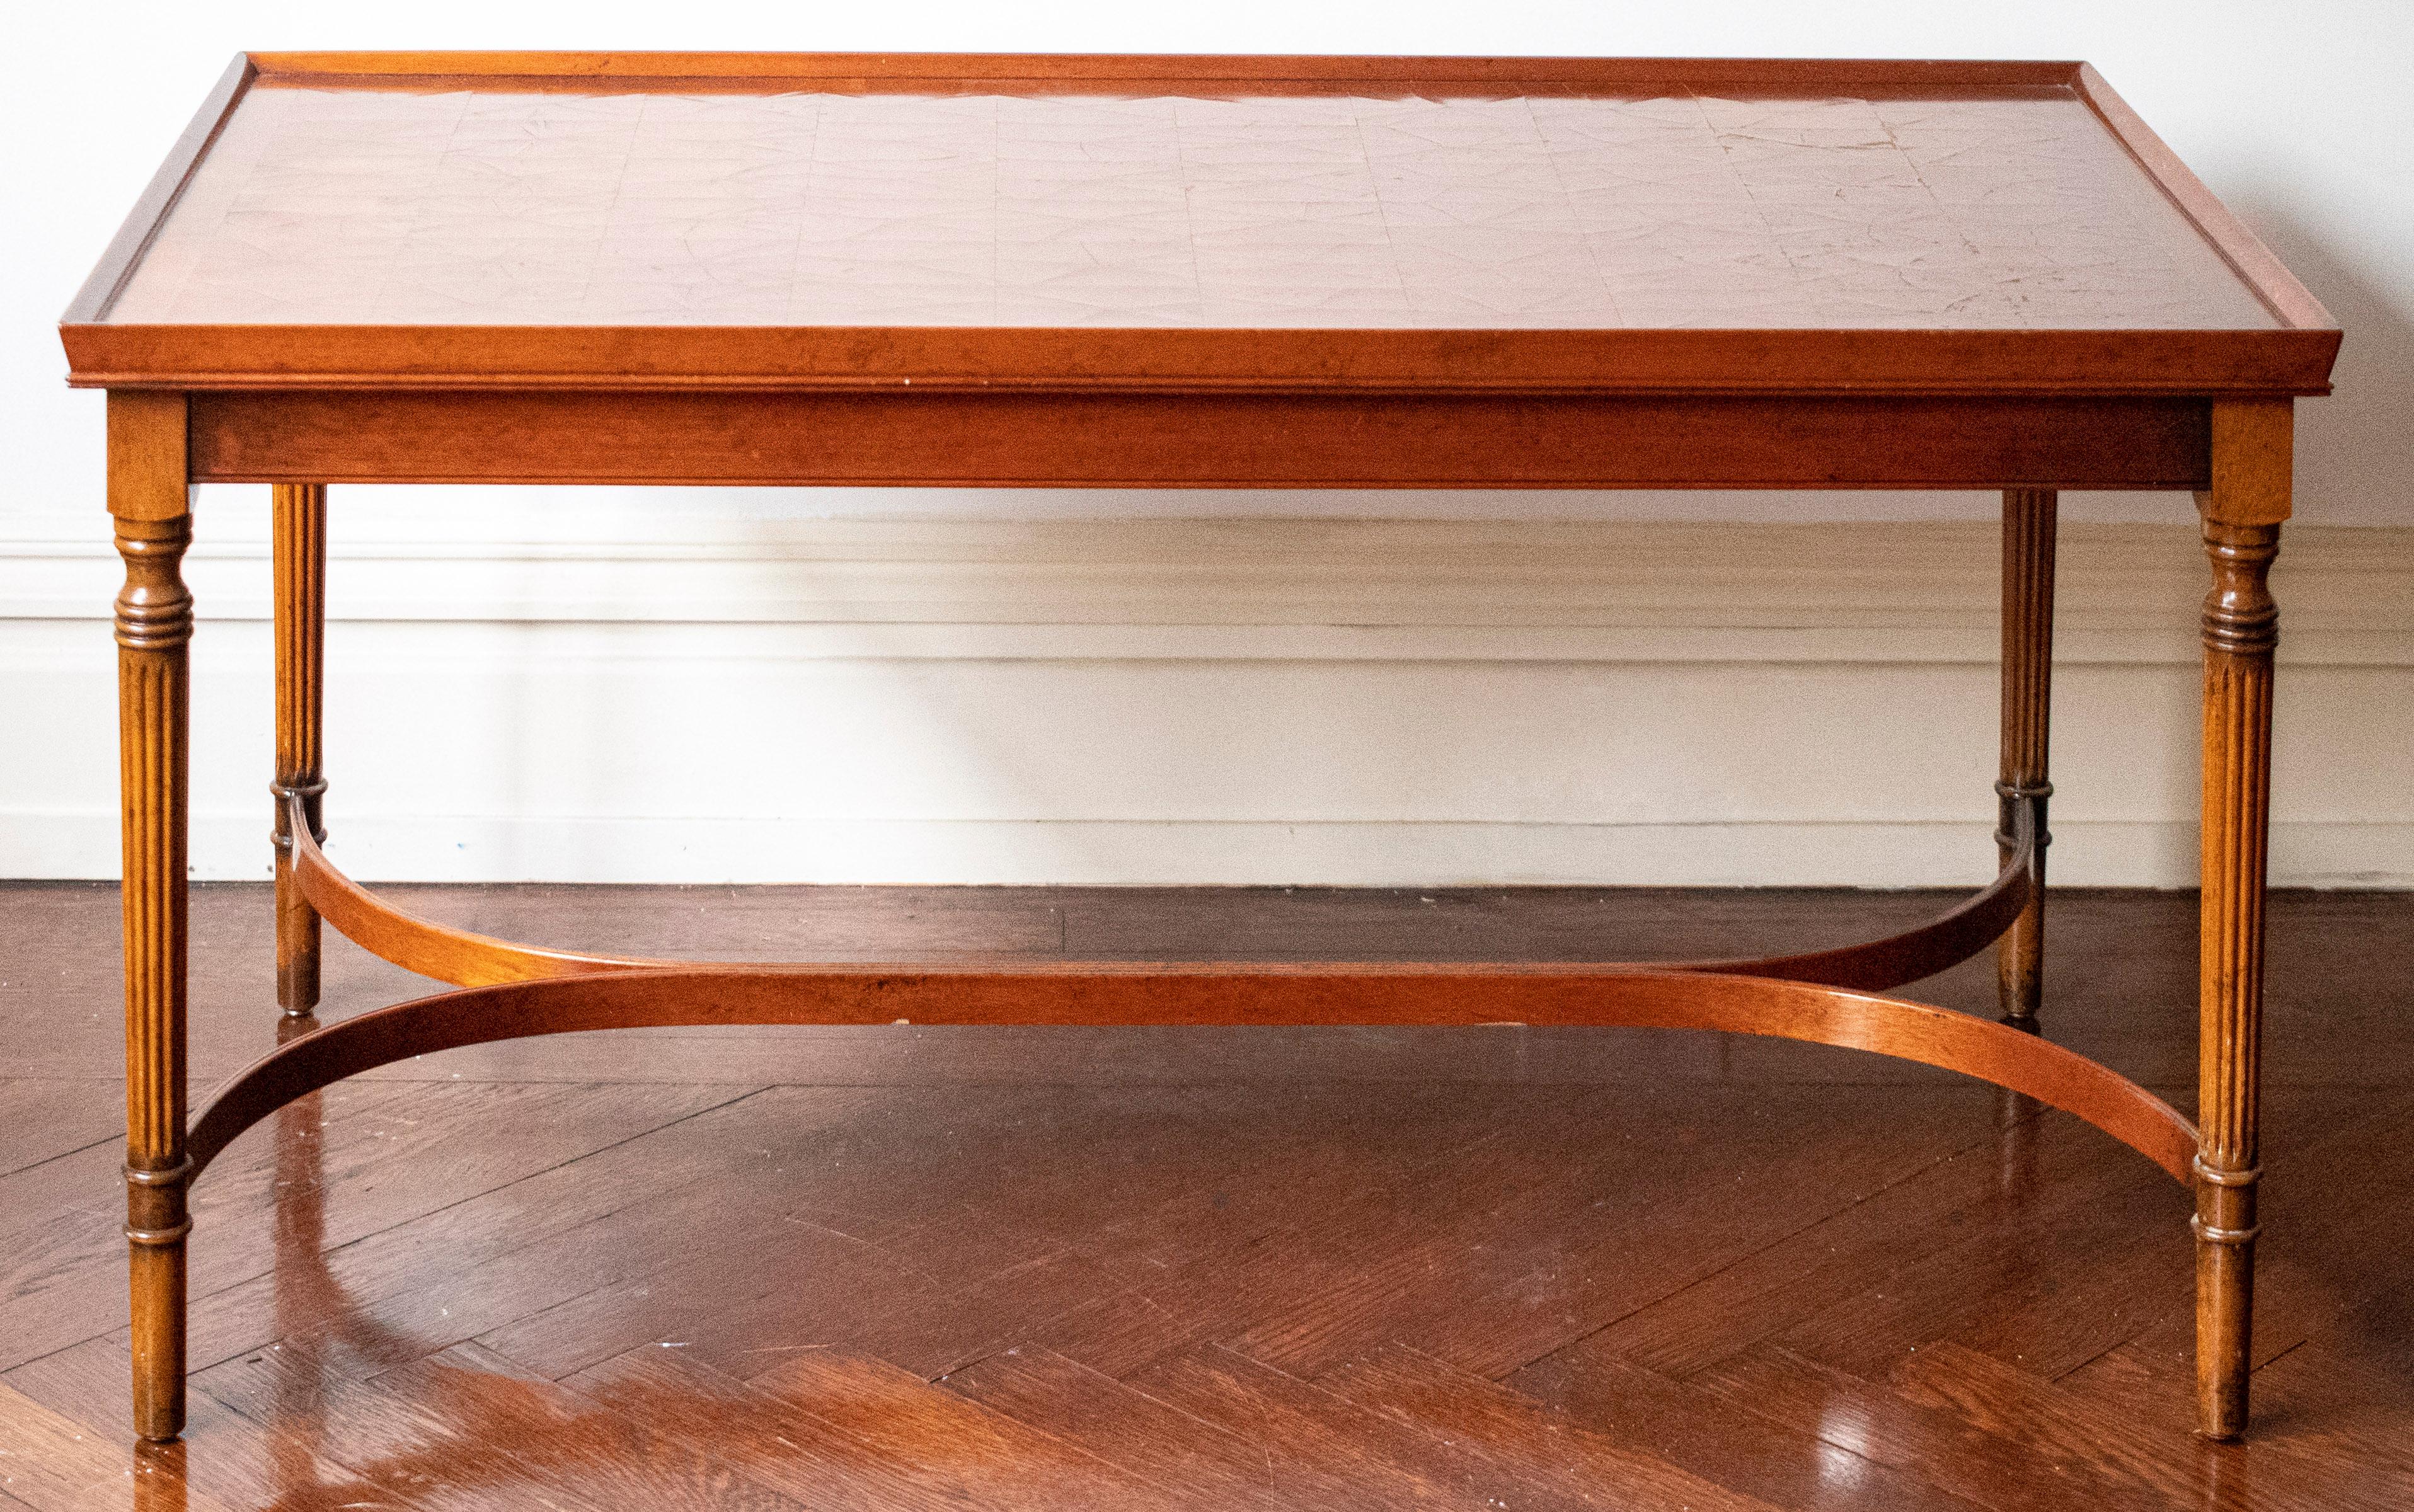 20th century mahogany coffee table, the rectangular top raised on fluted legs with demilune stretchers. Measures: 19.5